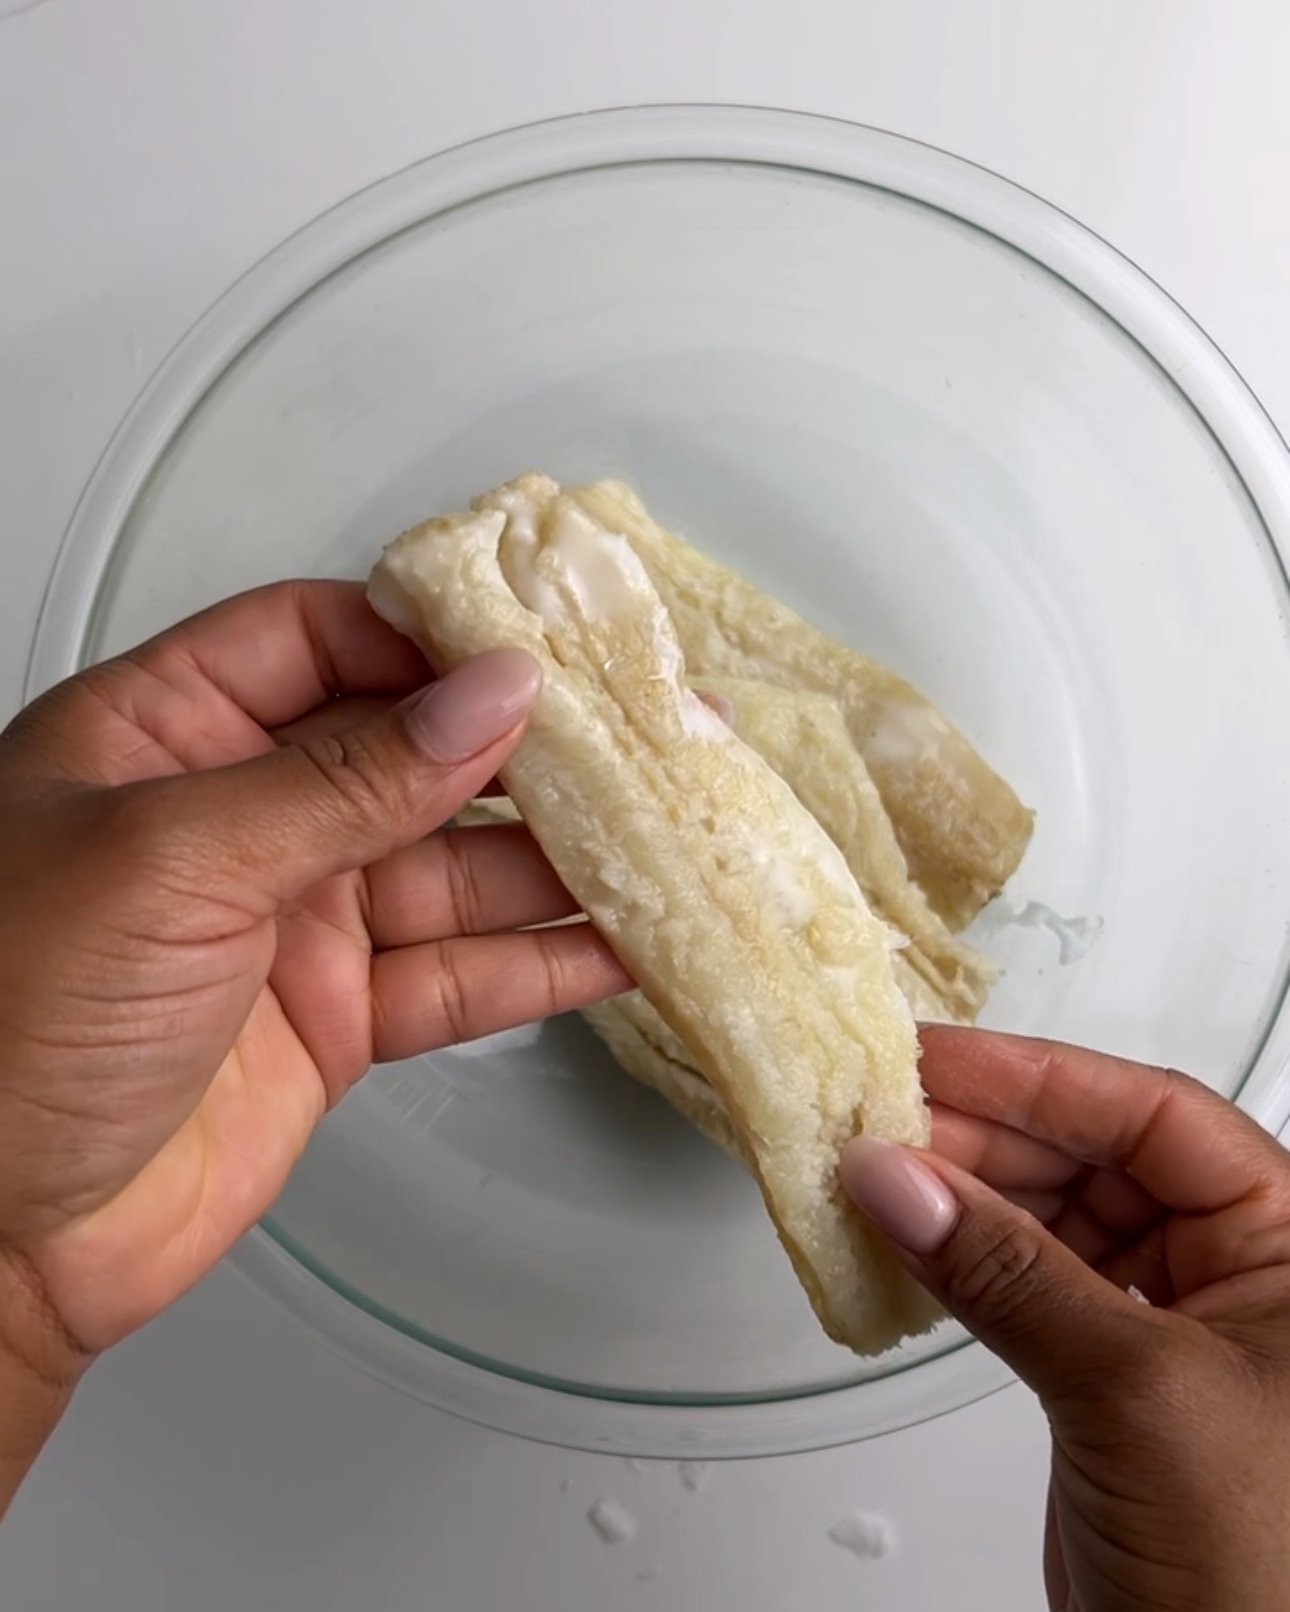 Holding a piece of saltfish to show the saltiness